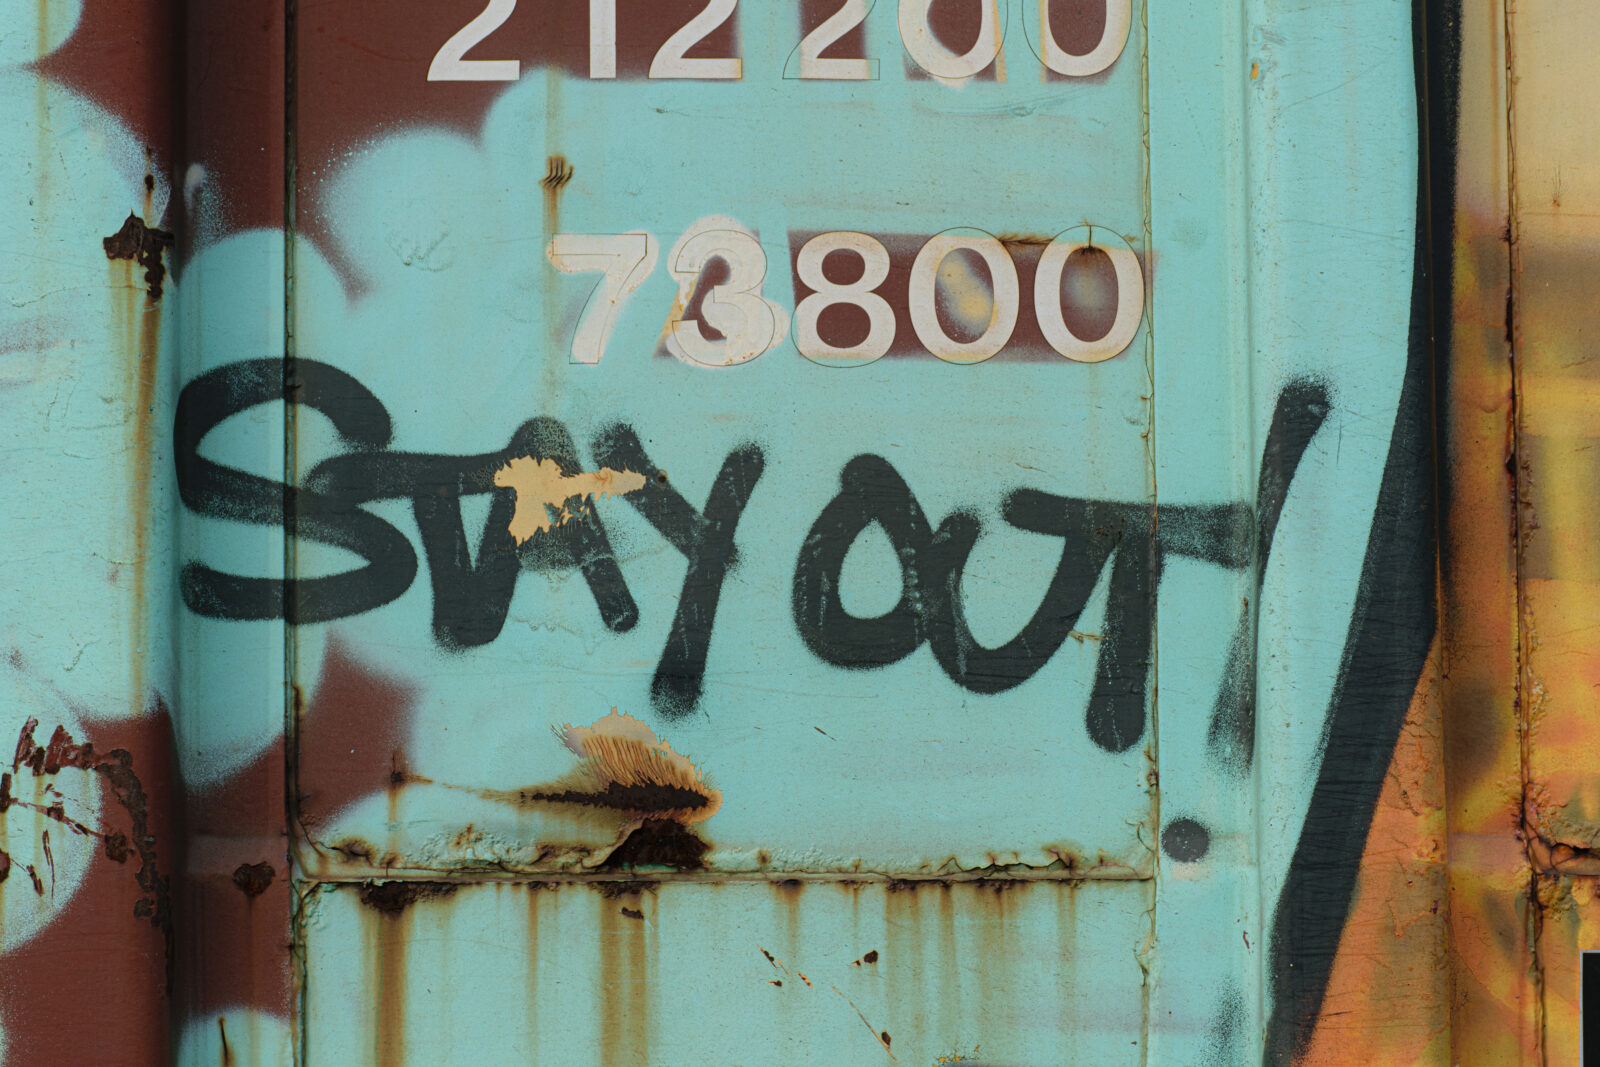 stay out painted on a train wagon